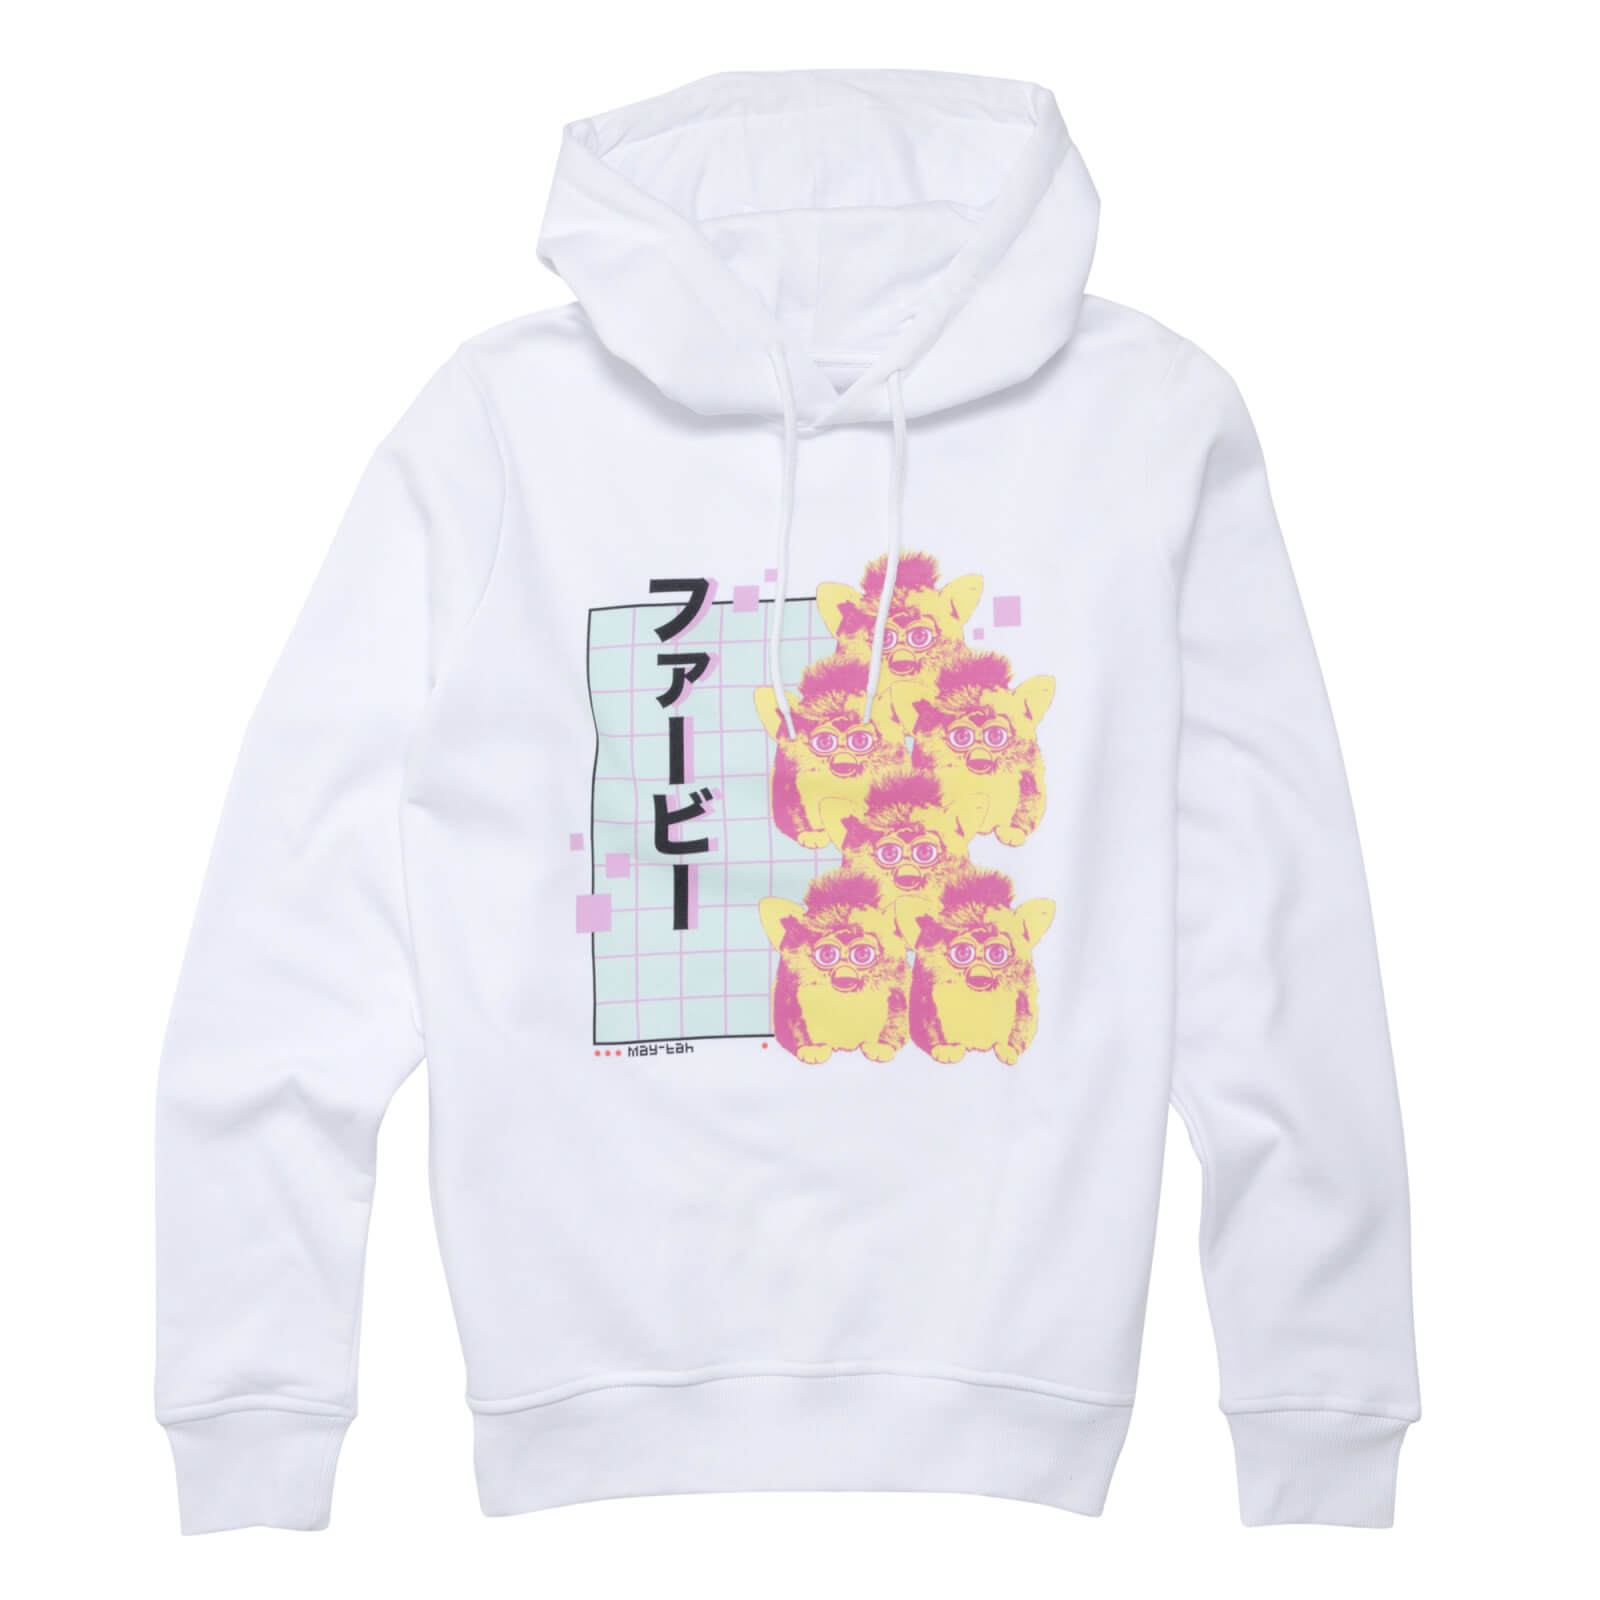 Furby Glitched Hoodie - White - S